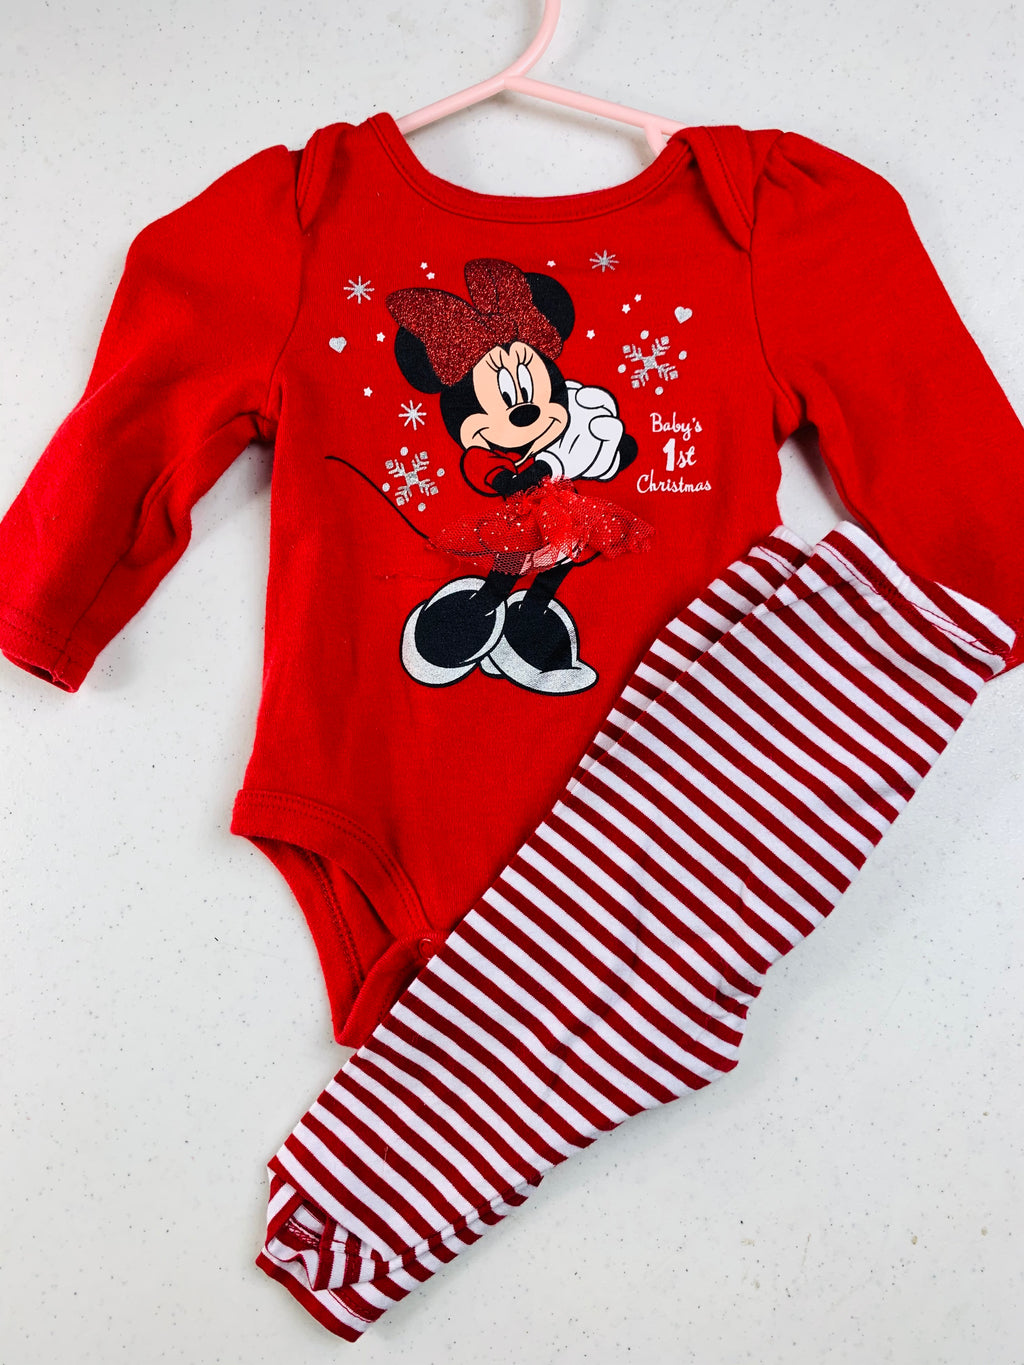 Resale Minnie Baby’s first Christmas 6/9M 🧵